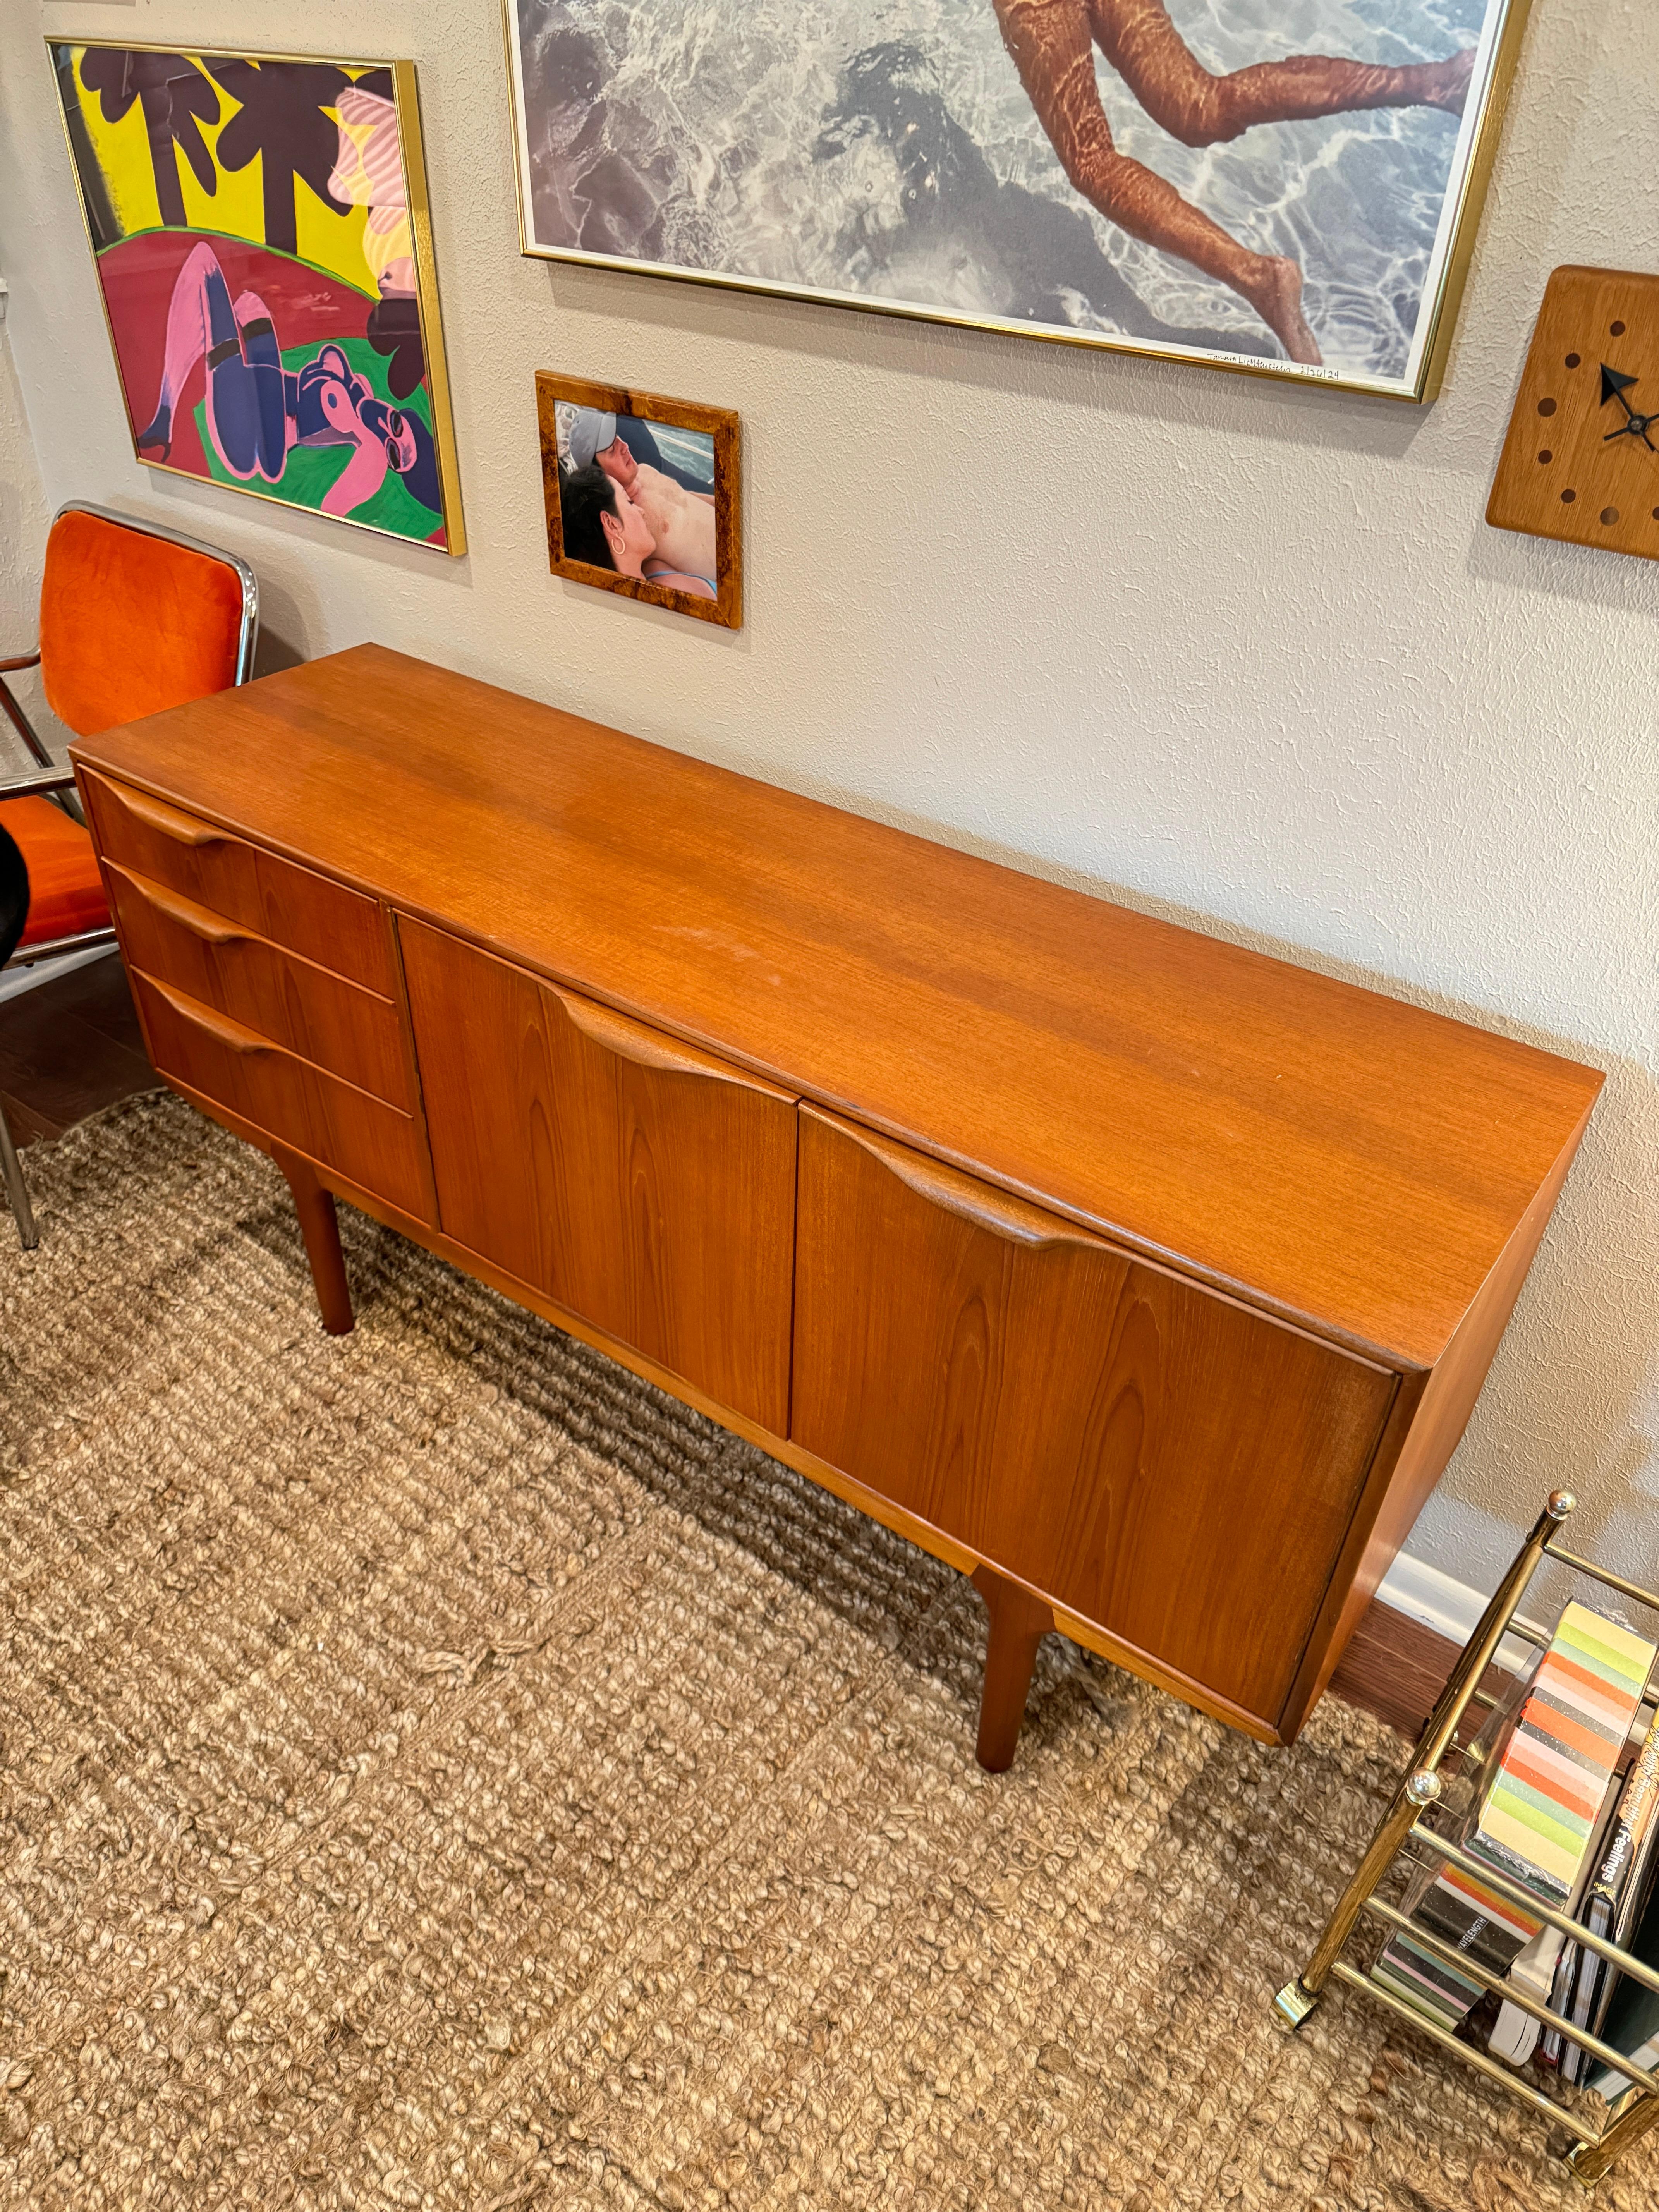 Vintage mid century modern sideboard with folded handles made by McIntosh 9